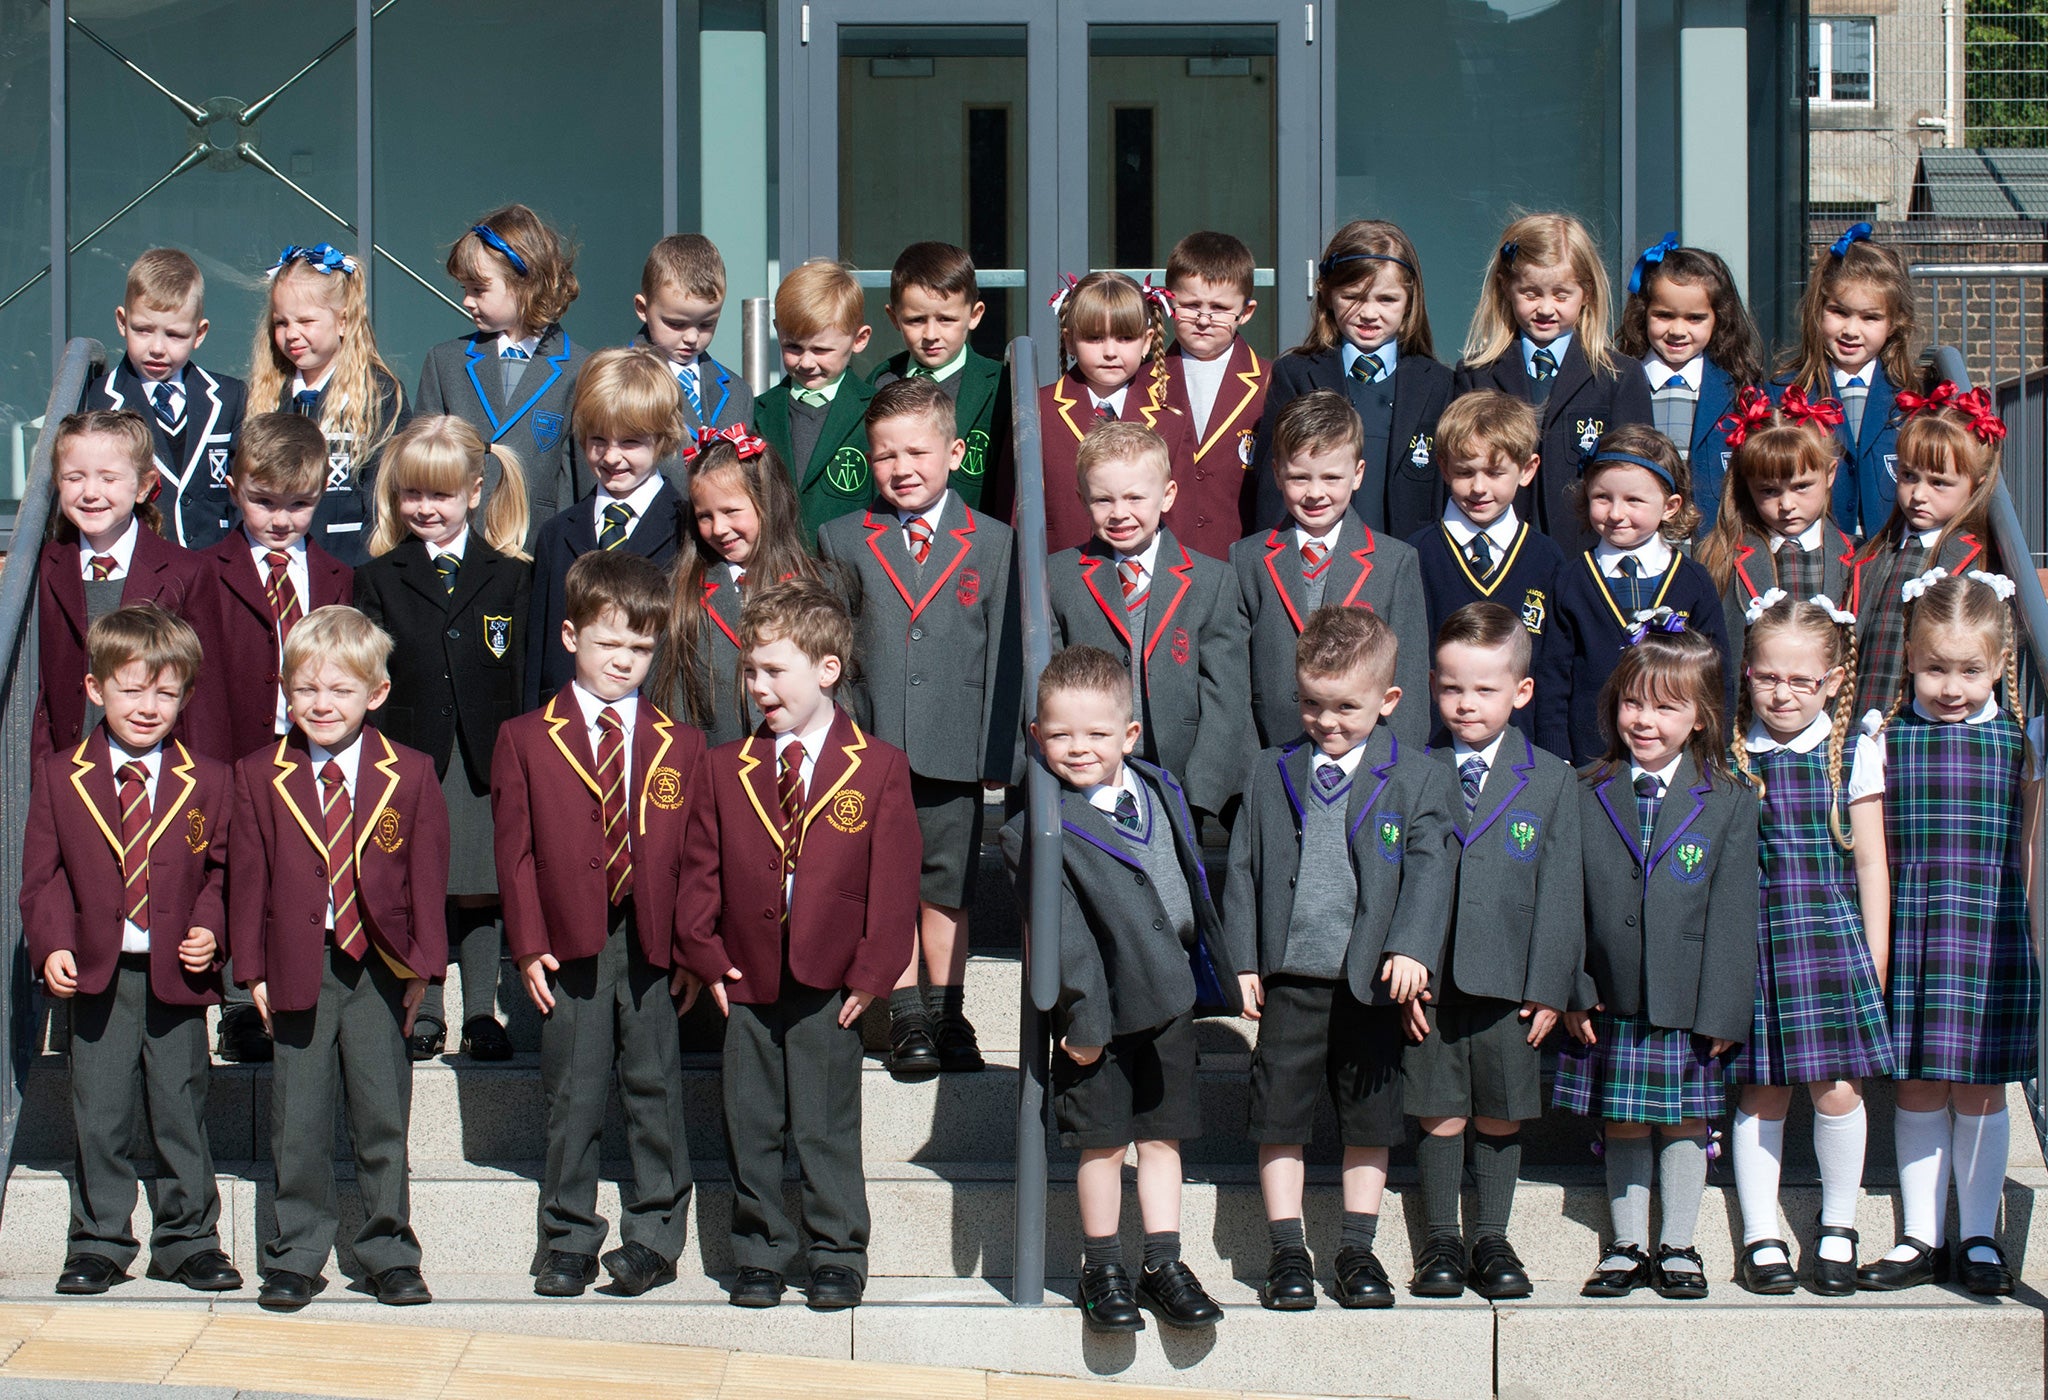 17 of the 19 sets of twins have met in their school uniforms at Ardgowan Primary School in Greenock